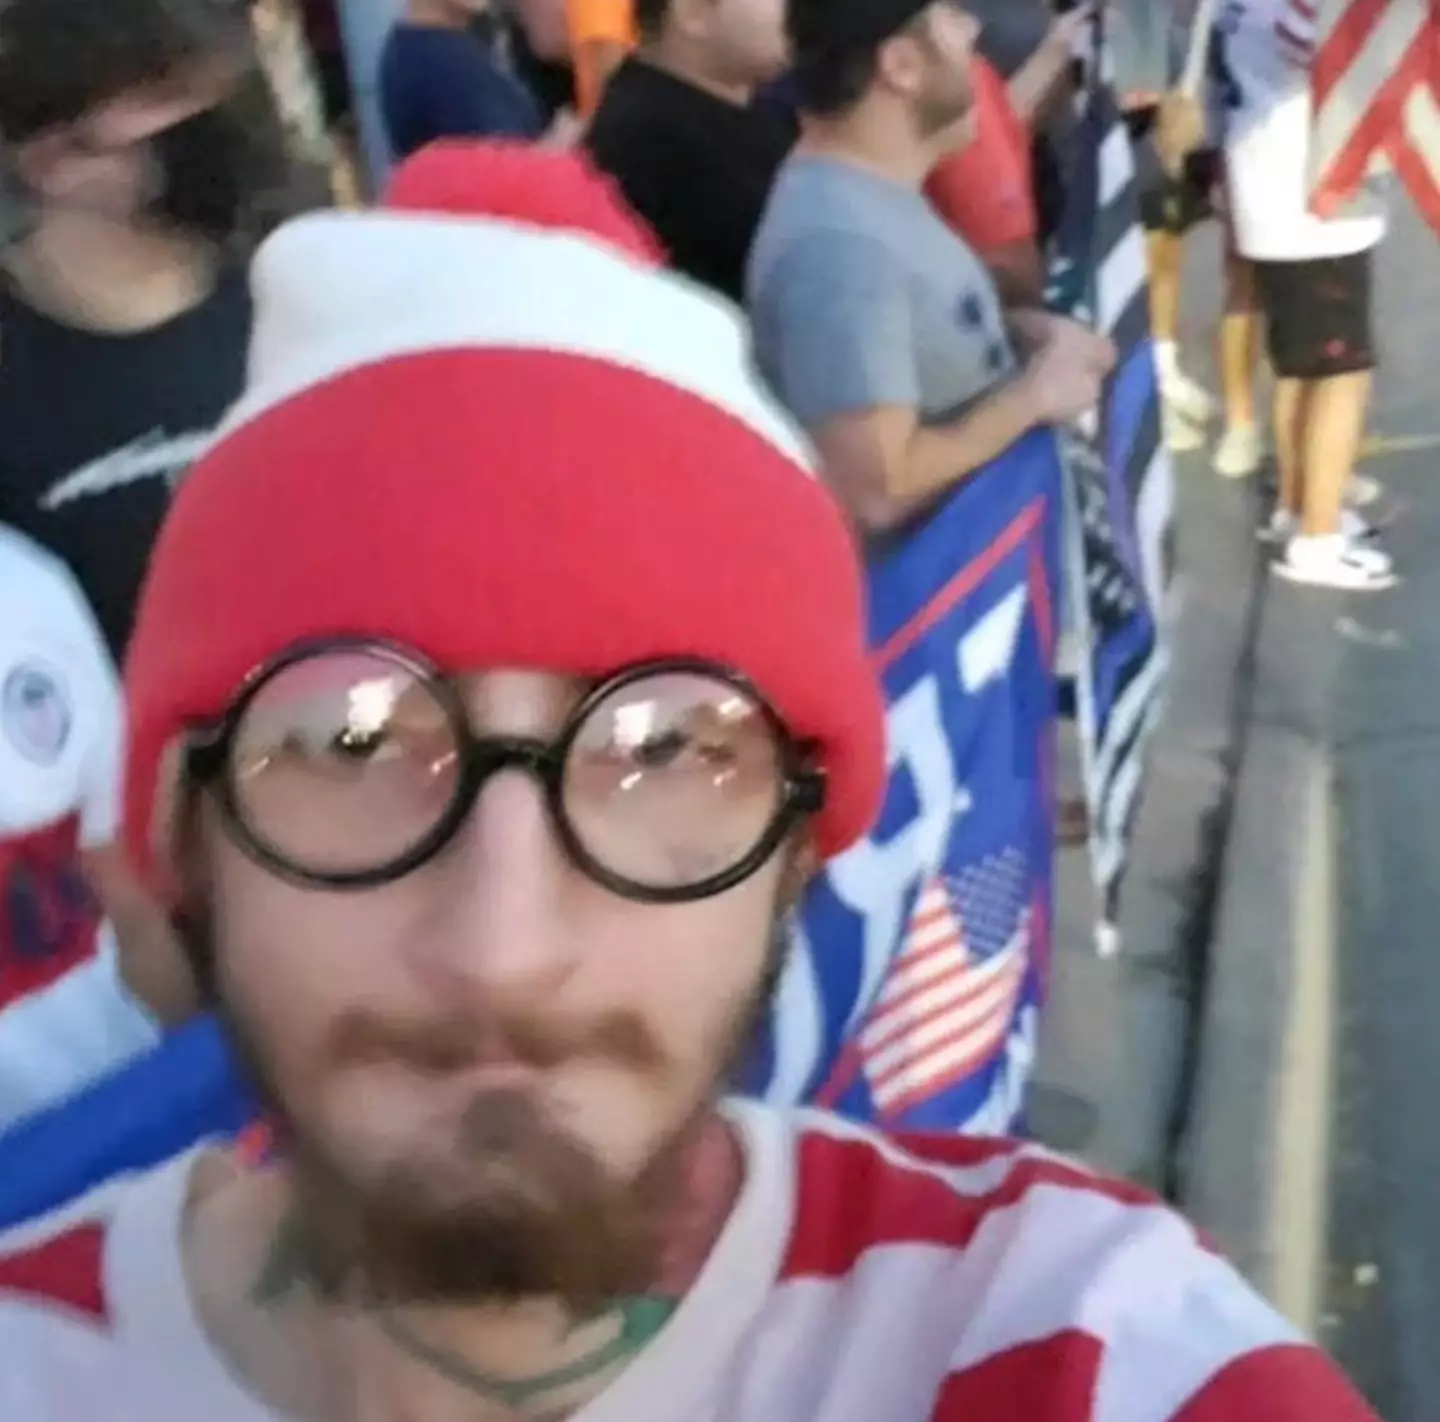 Crimo was pictured at a Trump rally dressed as Where's Wally.